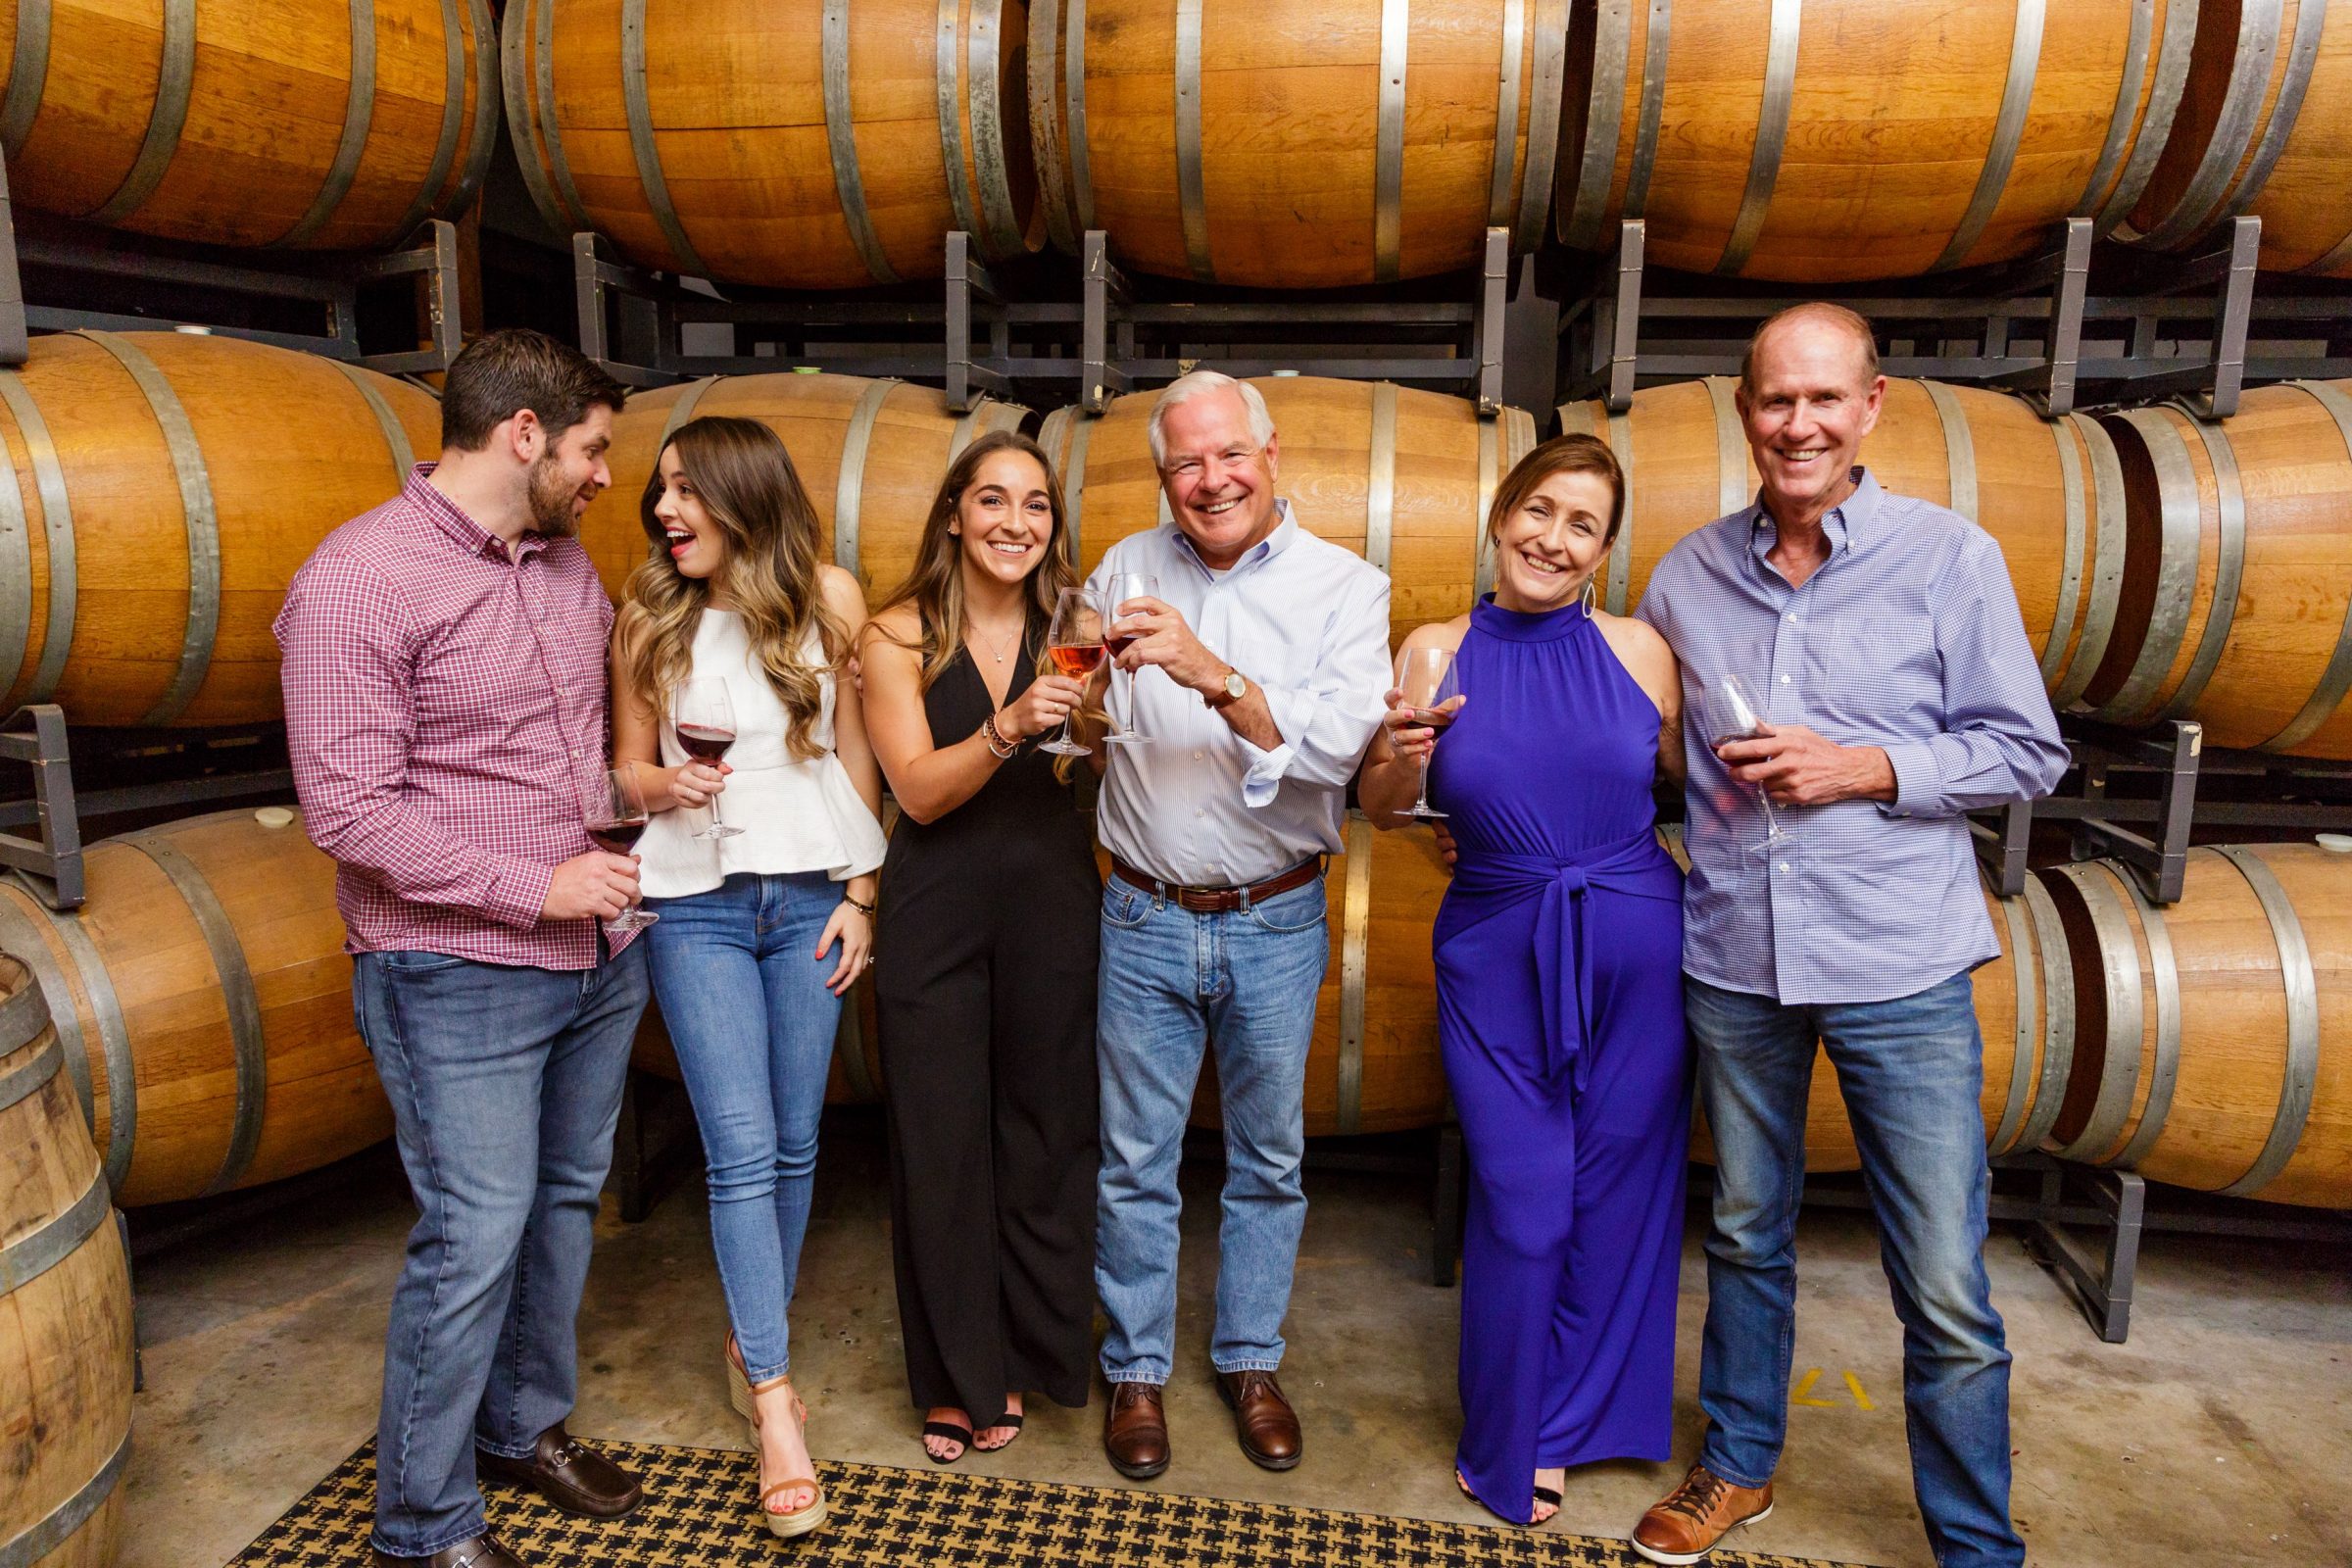 Three couples in front of wine casks